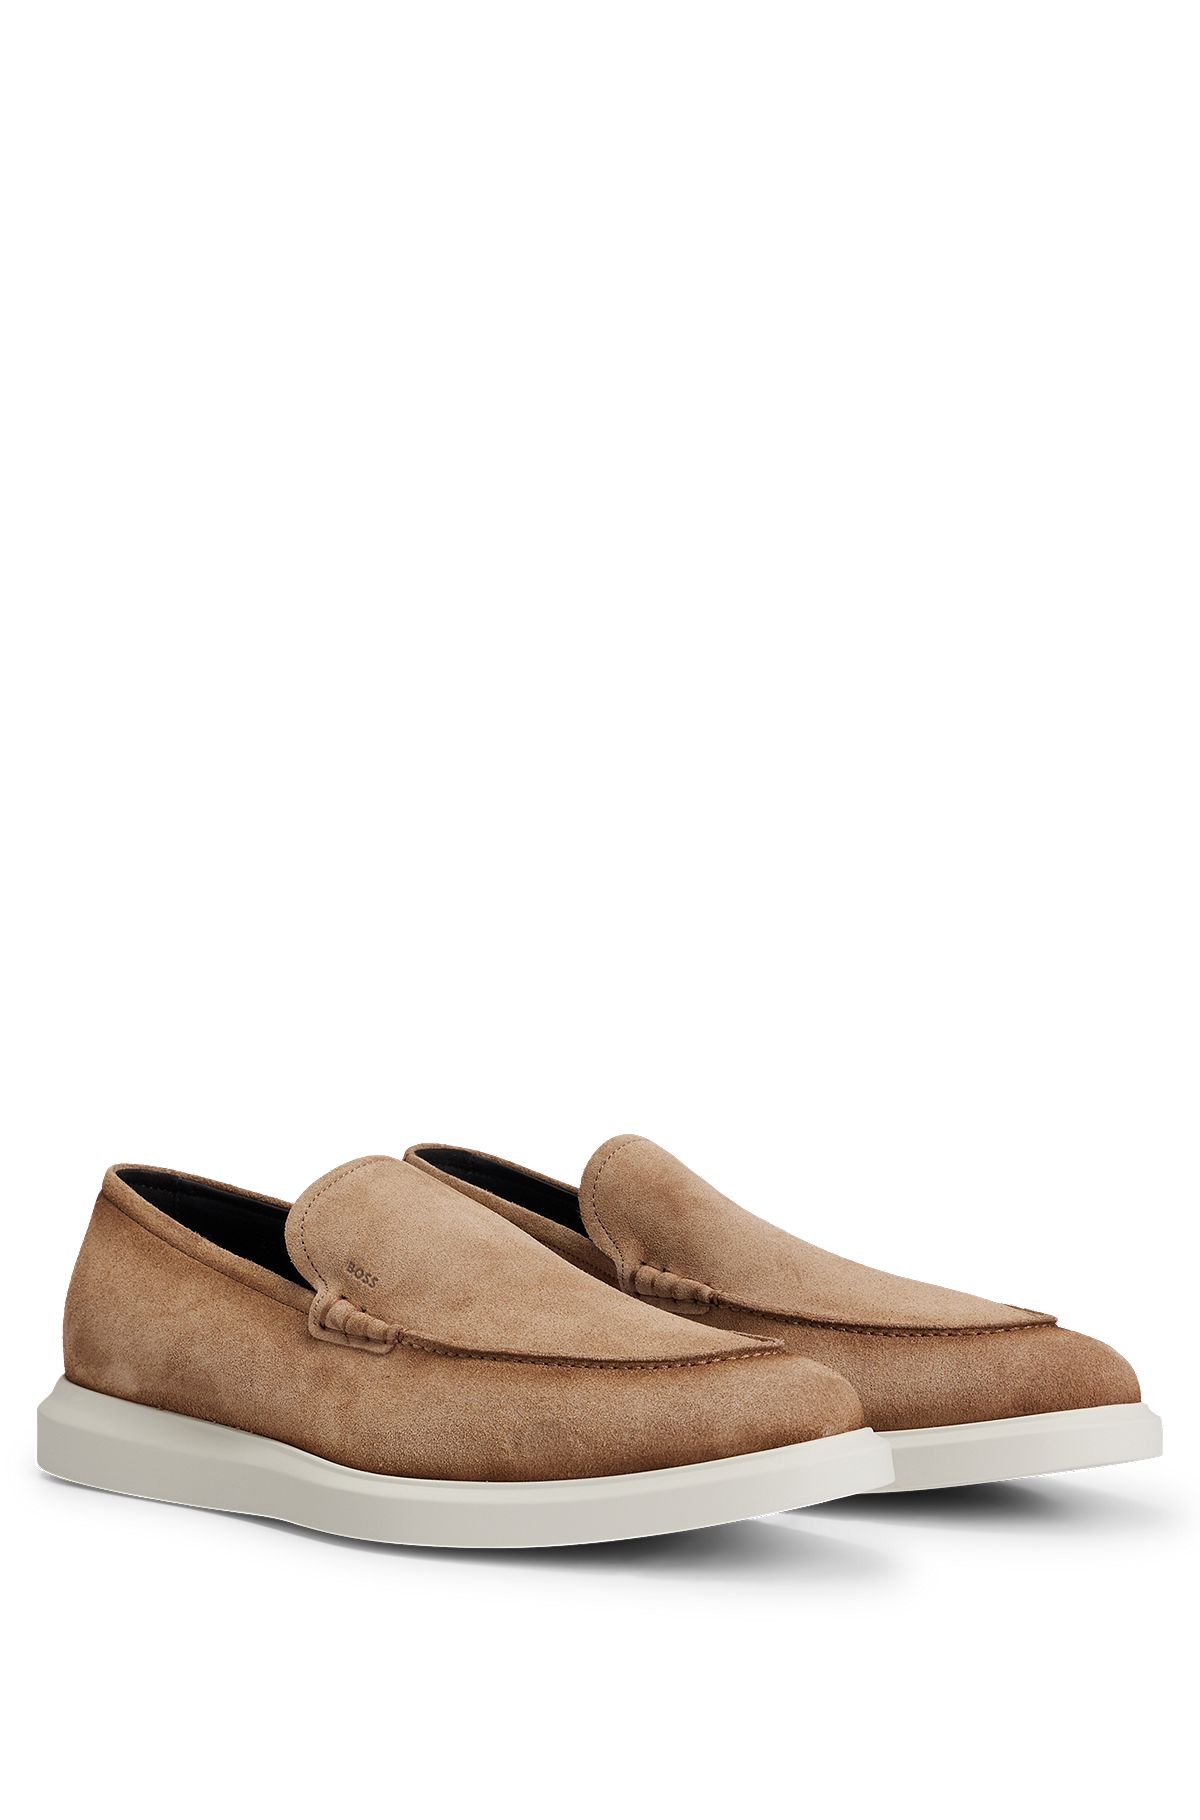 Suede loafers with lightweight outsole, Beige